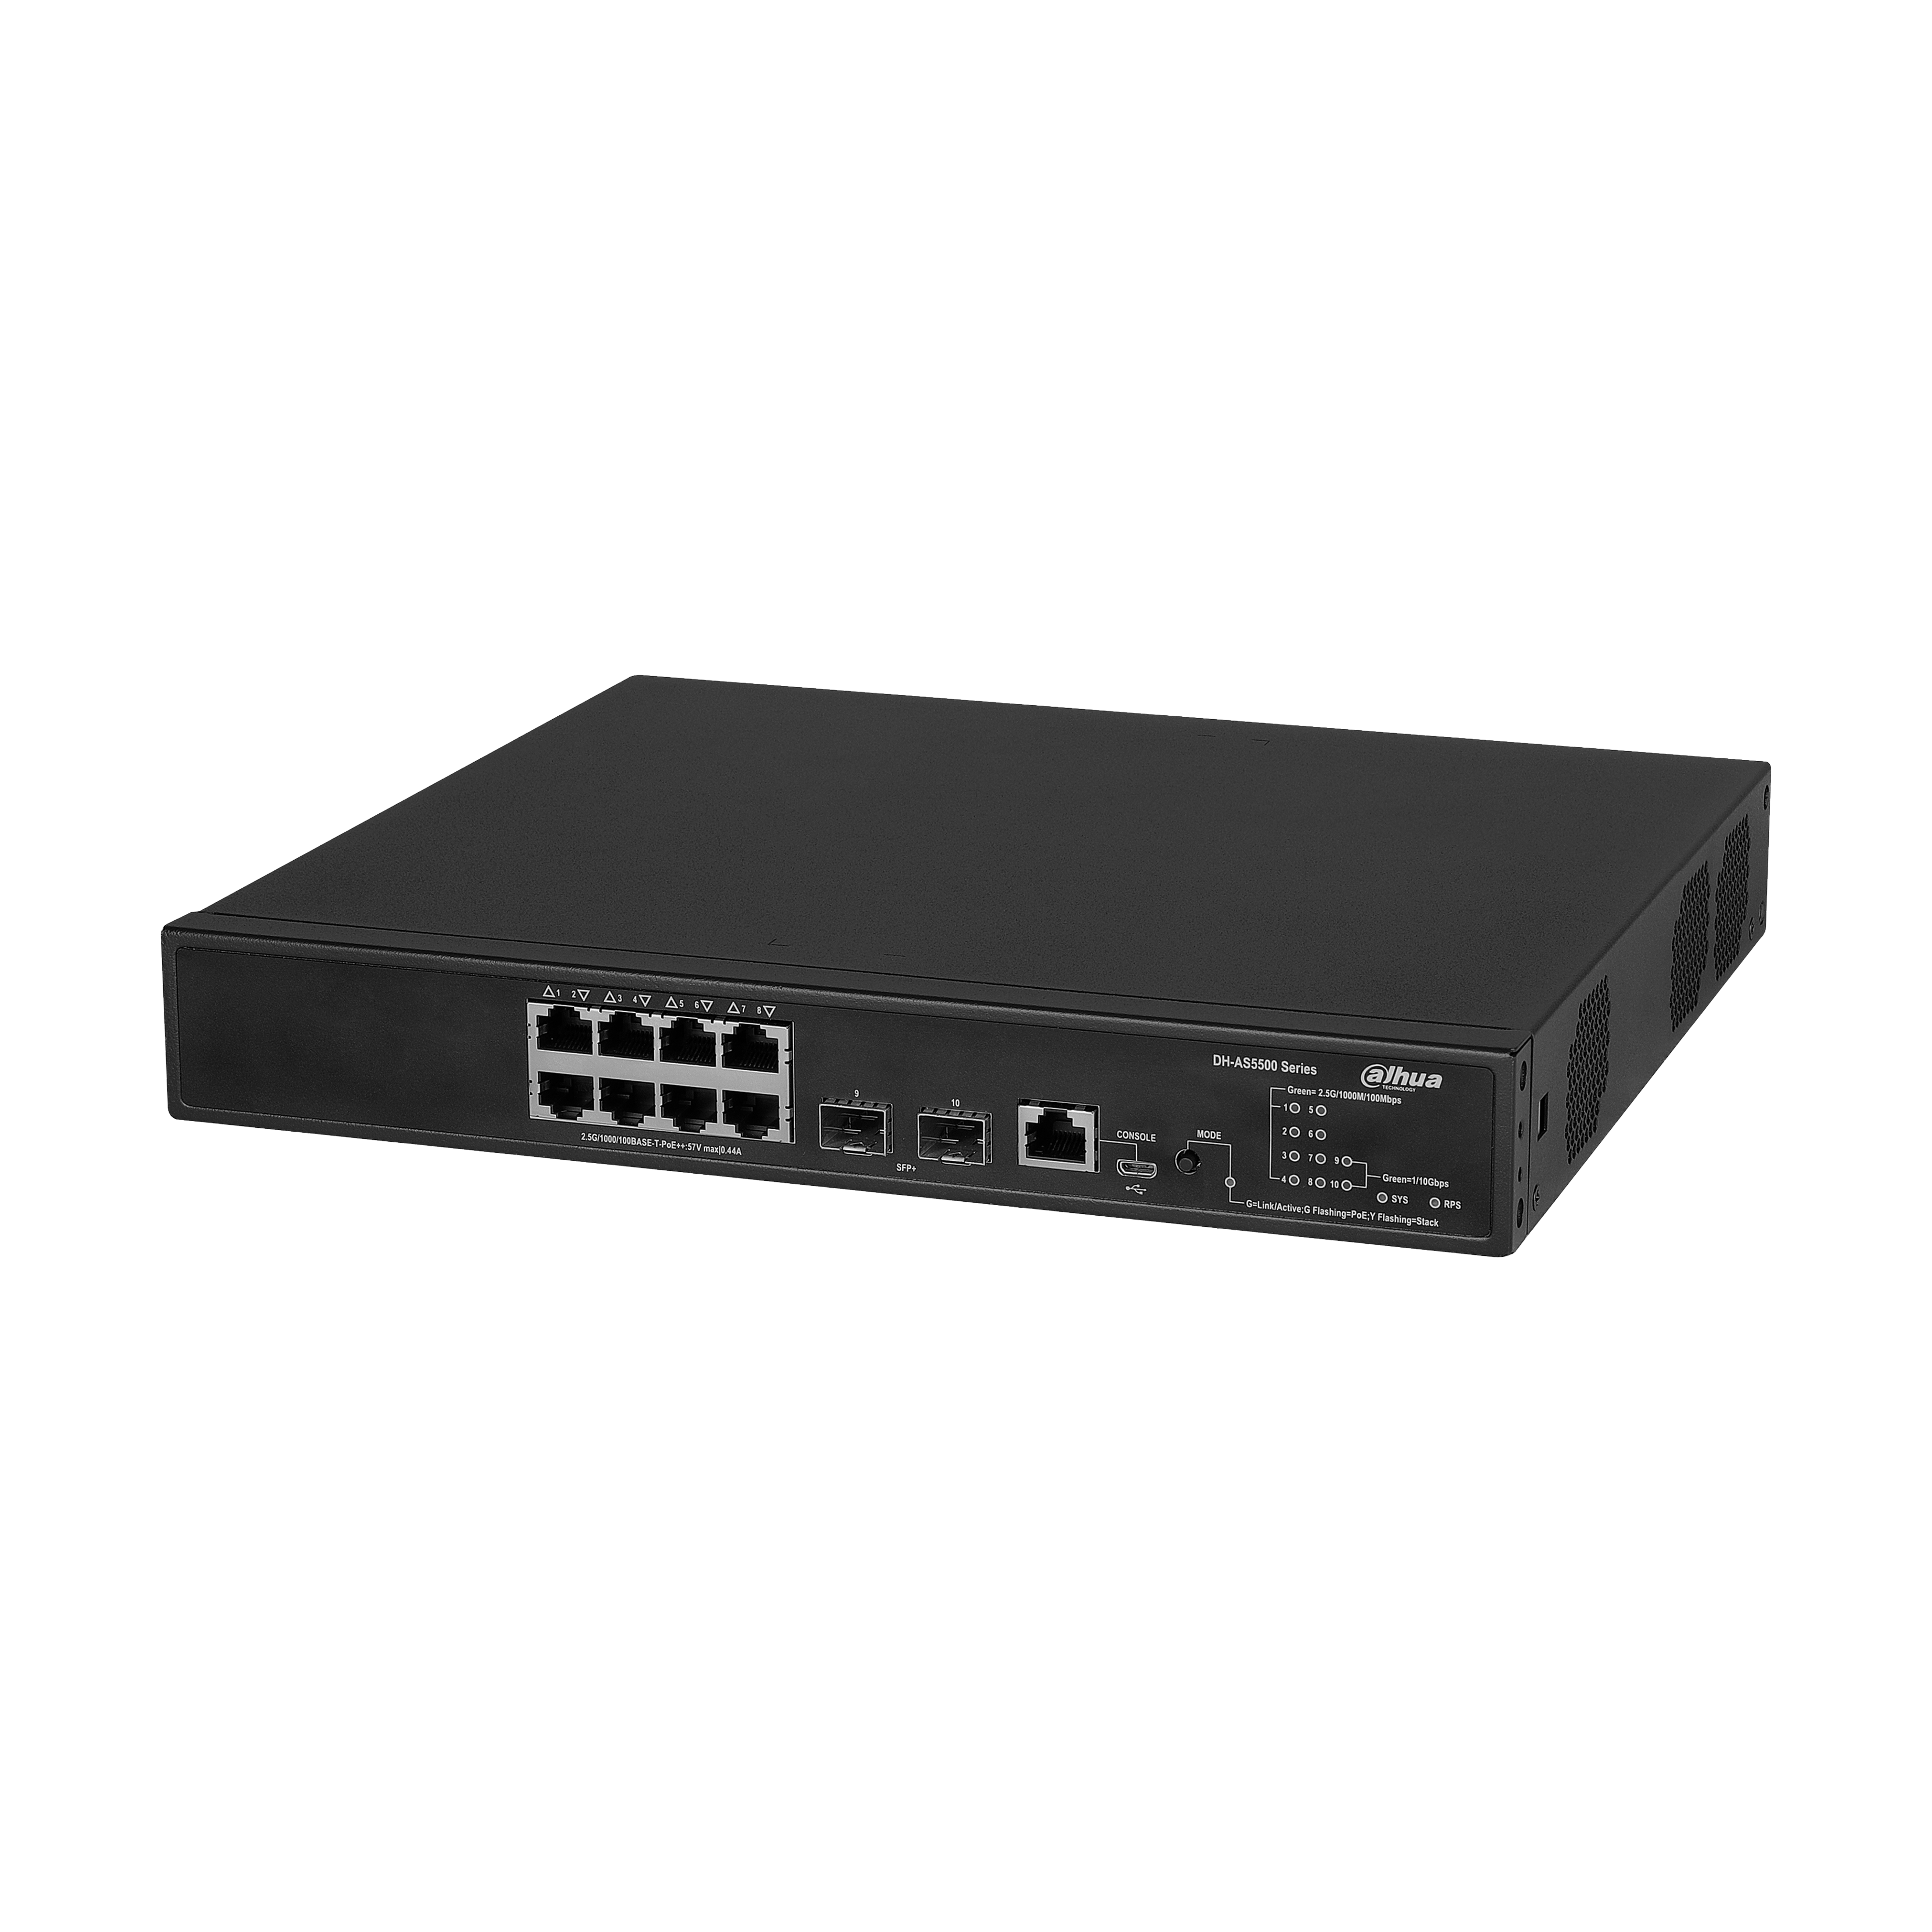 DAHUA AS5500-8MGT2XF-370 L3 Managed 8 10G Yes Switch